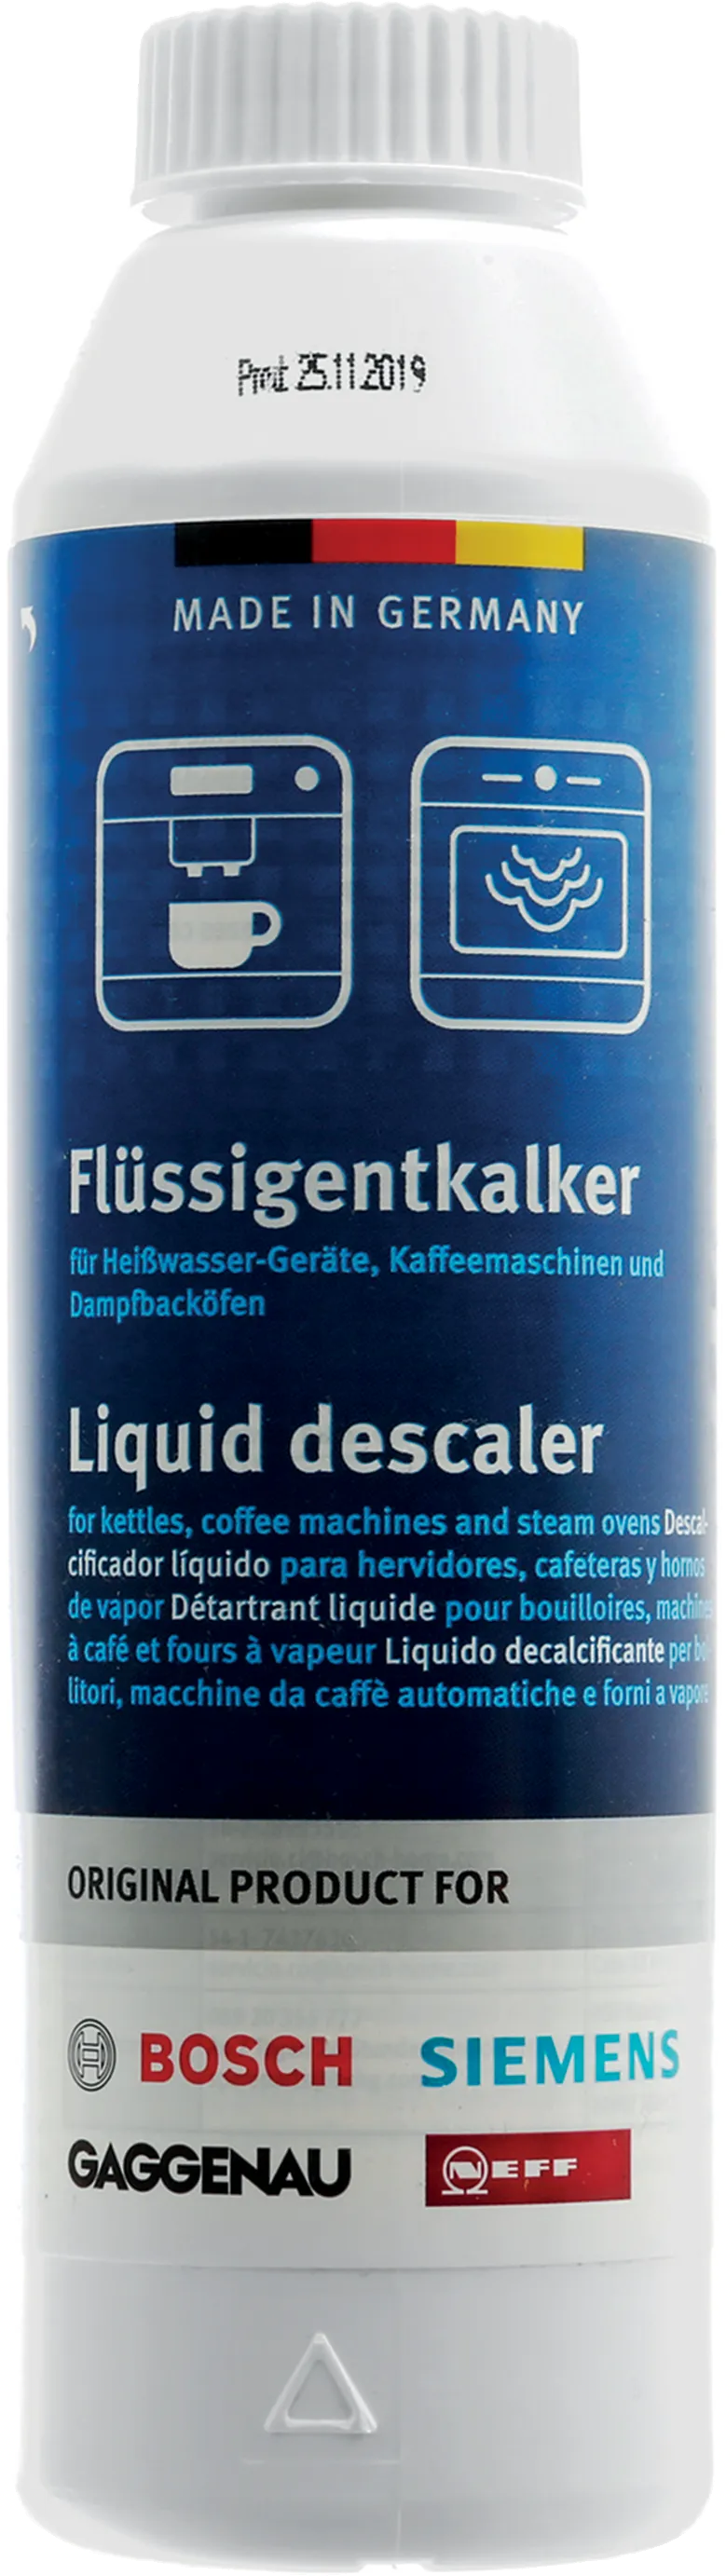 Liquid descaler for kettles, coffee machines and steam ovens 